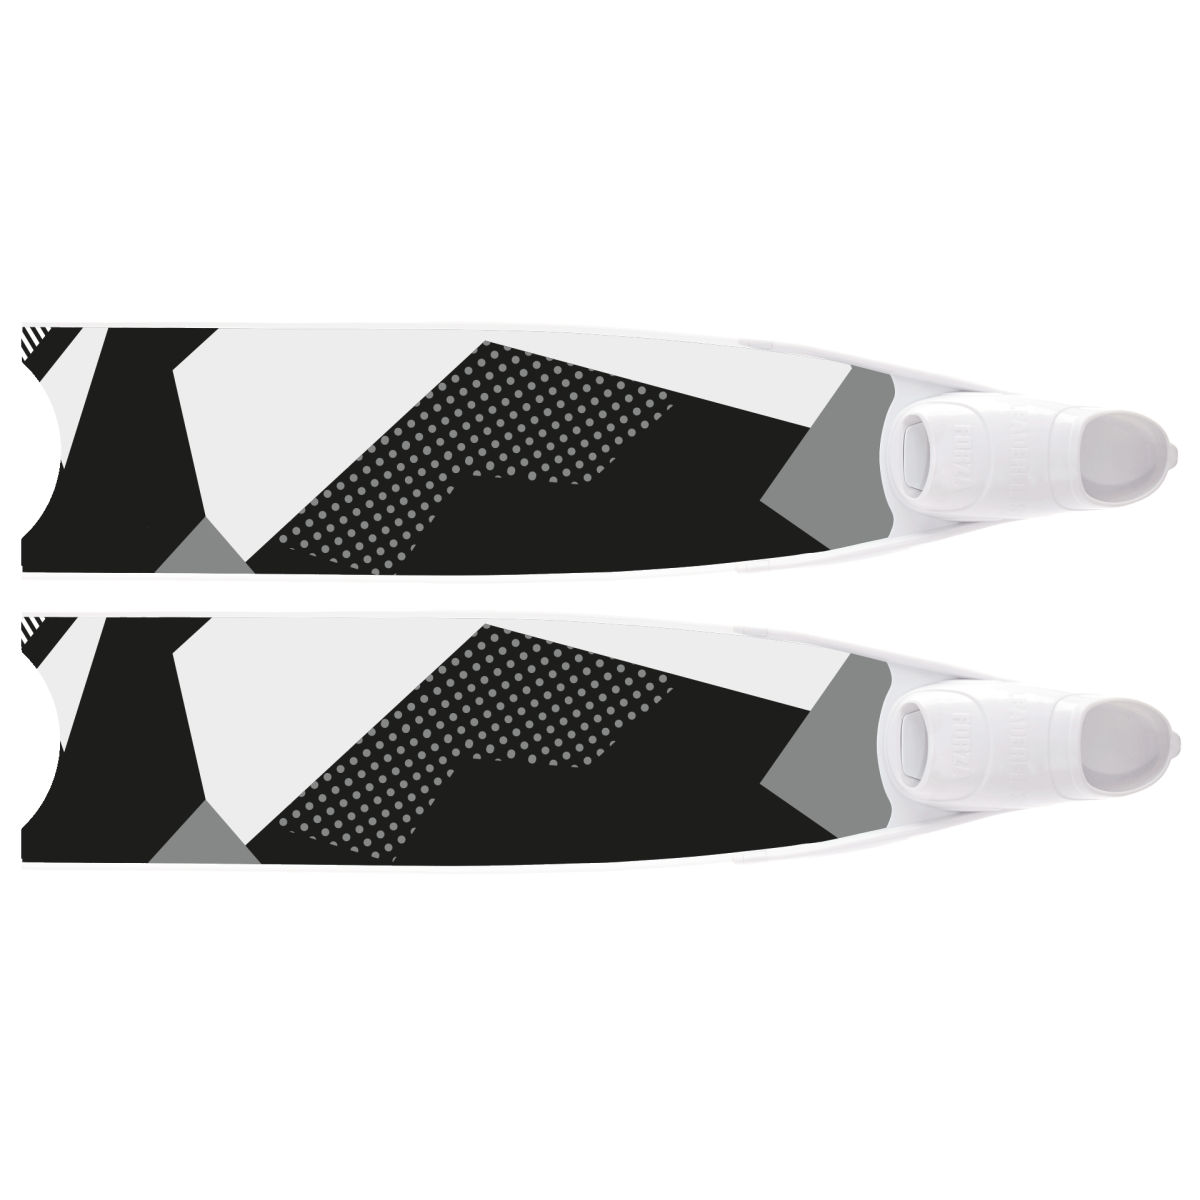 Leaderfins Limited Edition Product Image